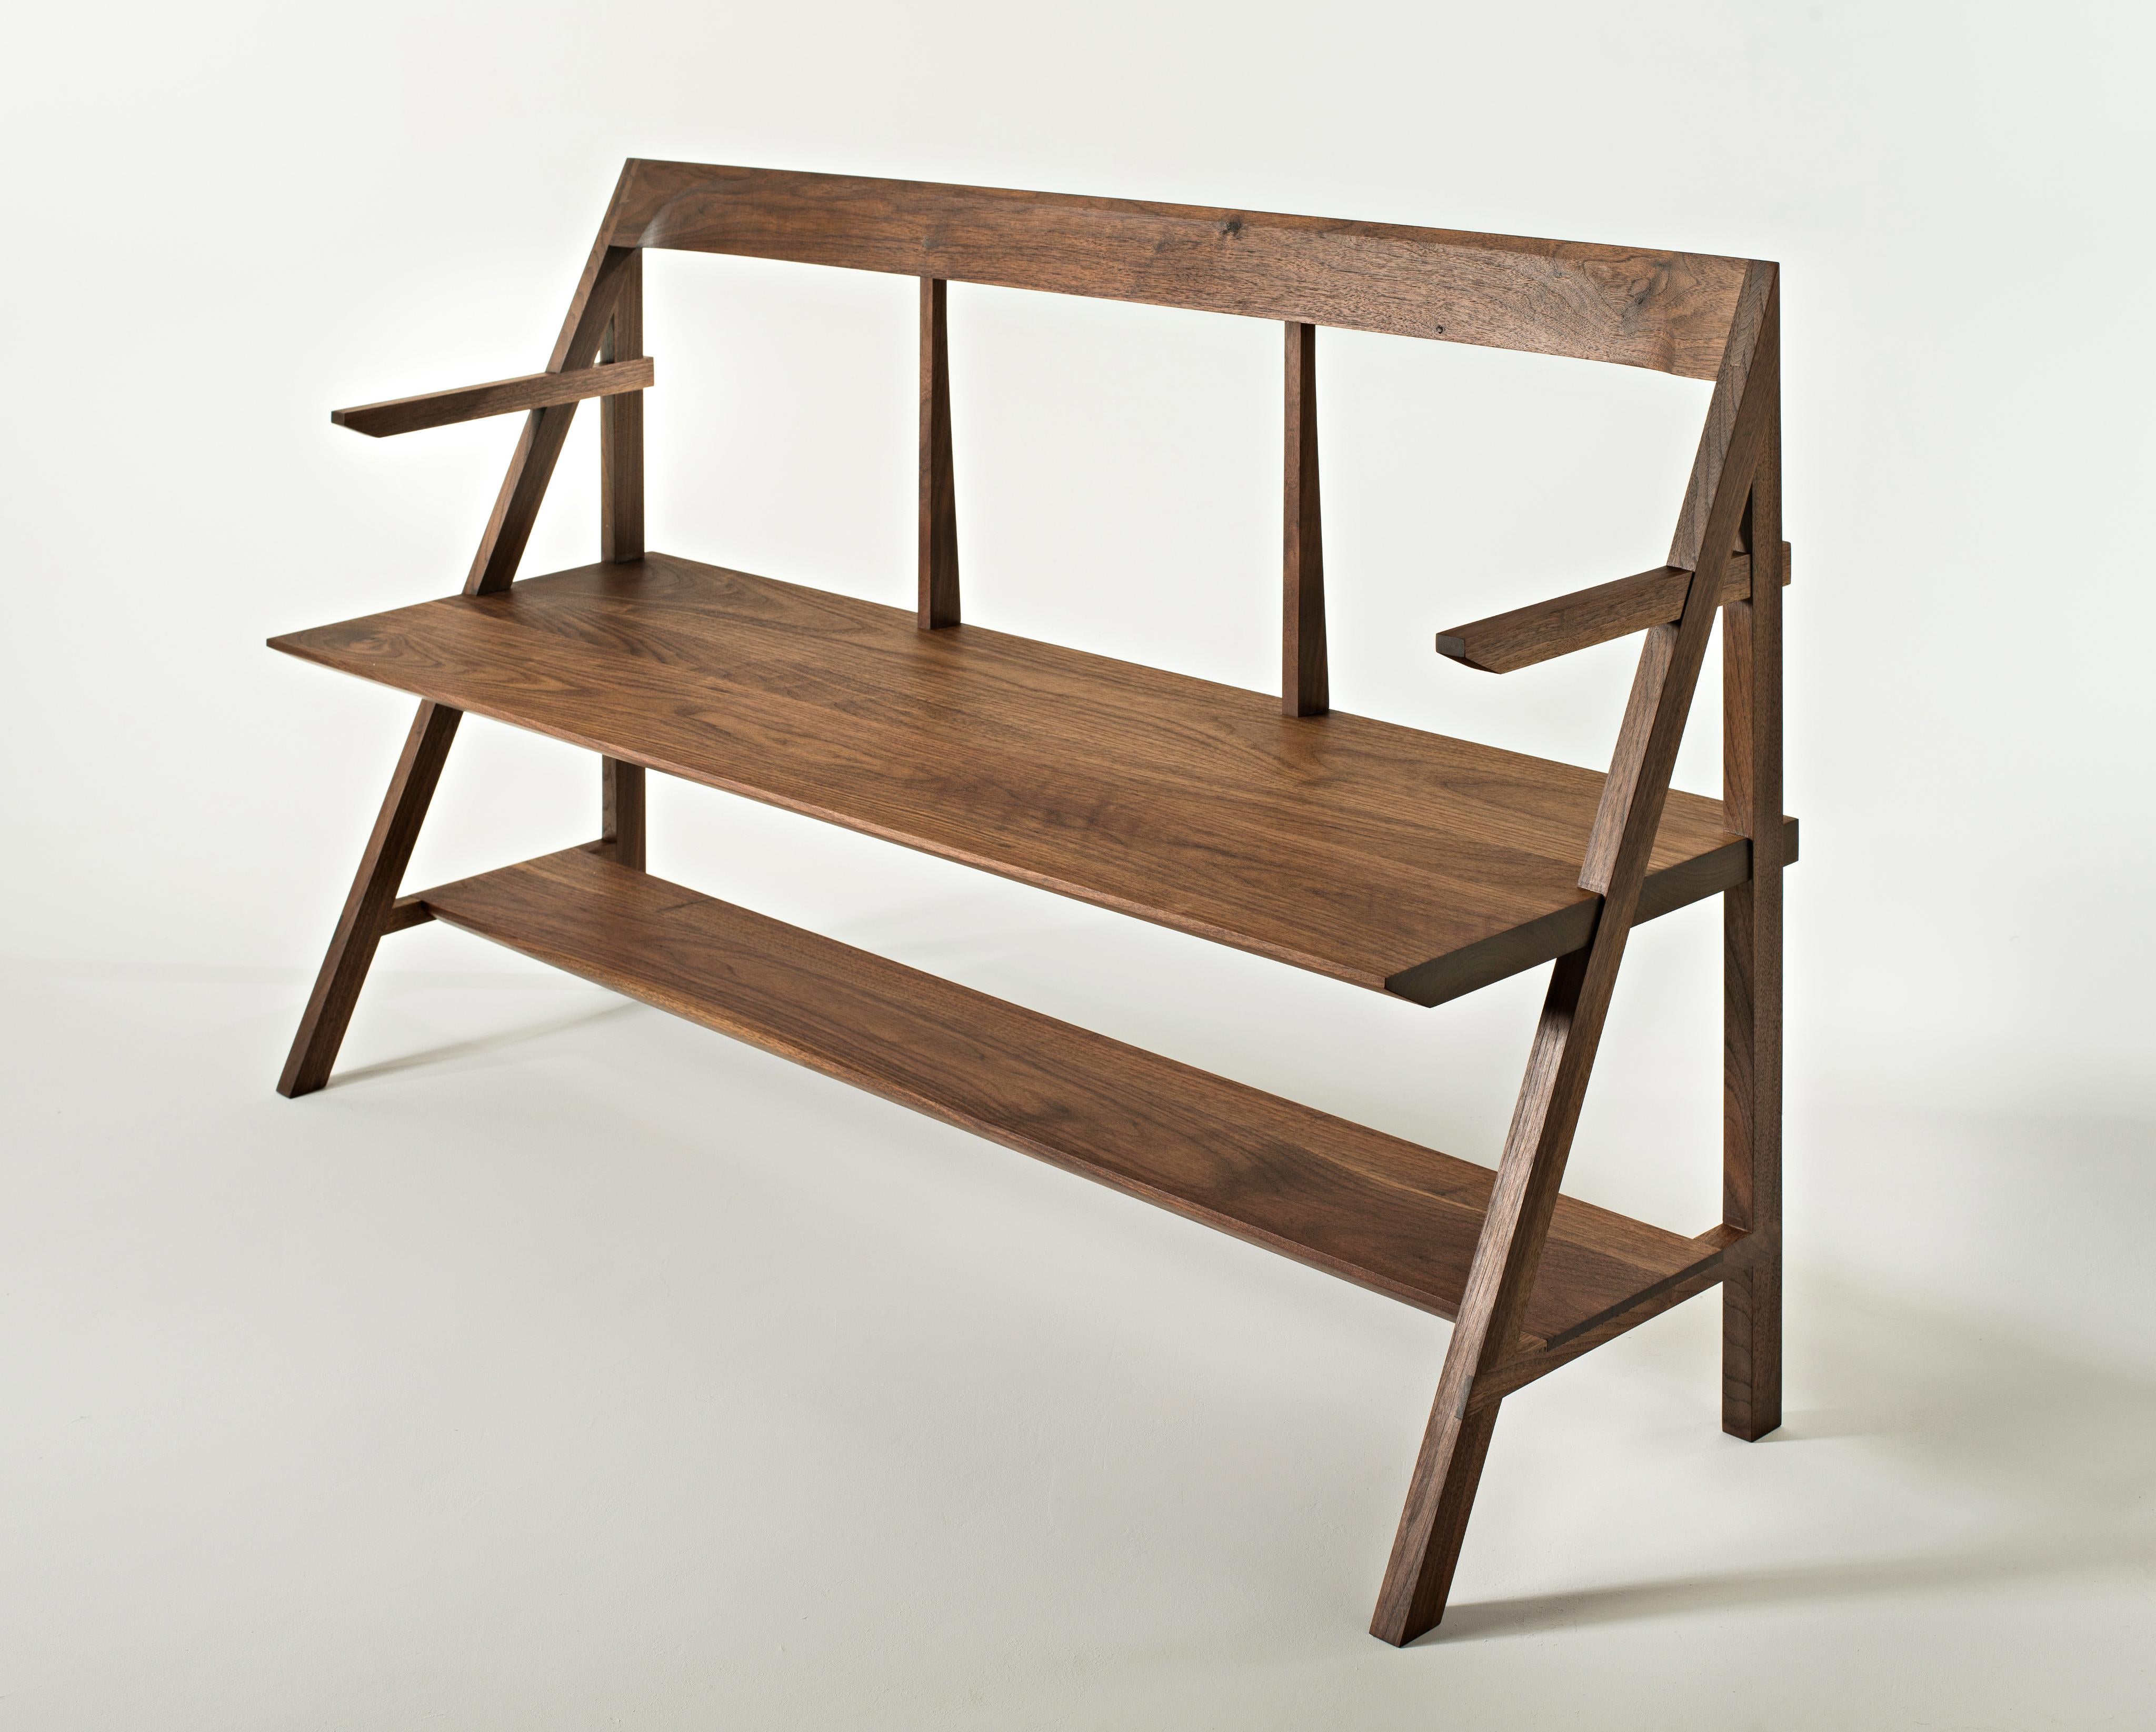 The Cantilever Bench is a simplified form that blends rationality with functionality.
Originally envisioned as an entryway piece, the shelf below provides a practical means of storage without encumbering the overall balance of the piece.